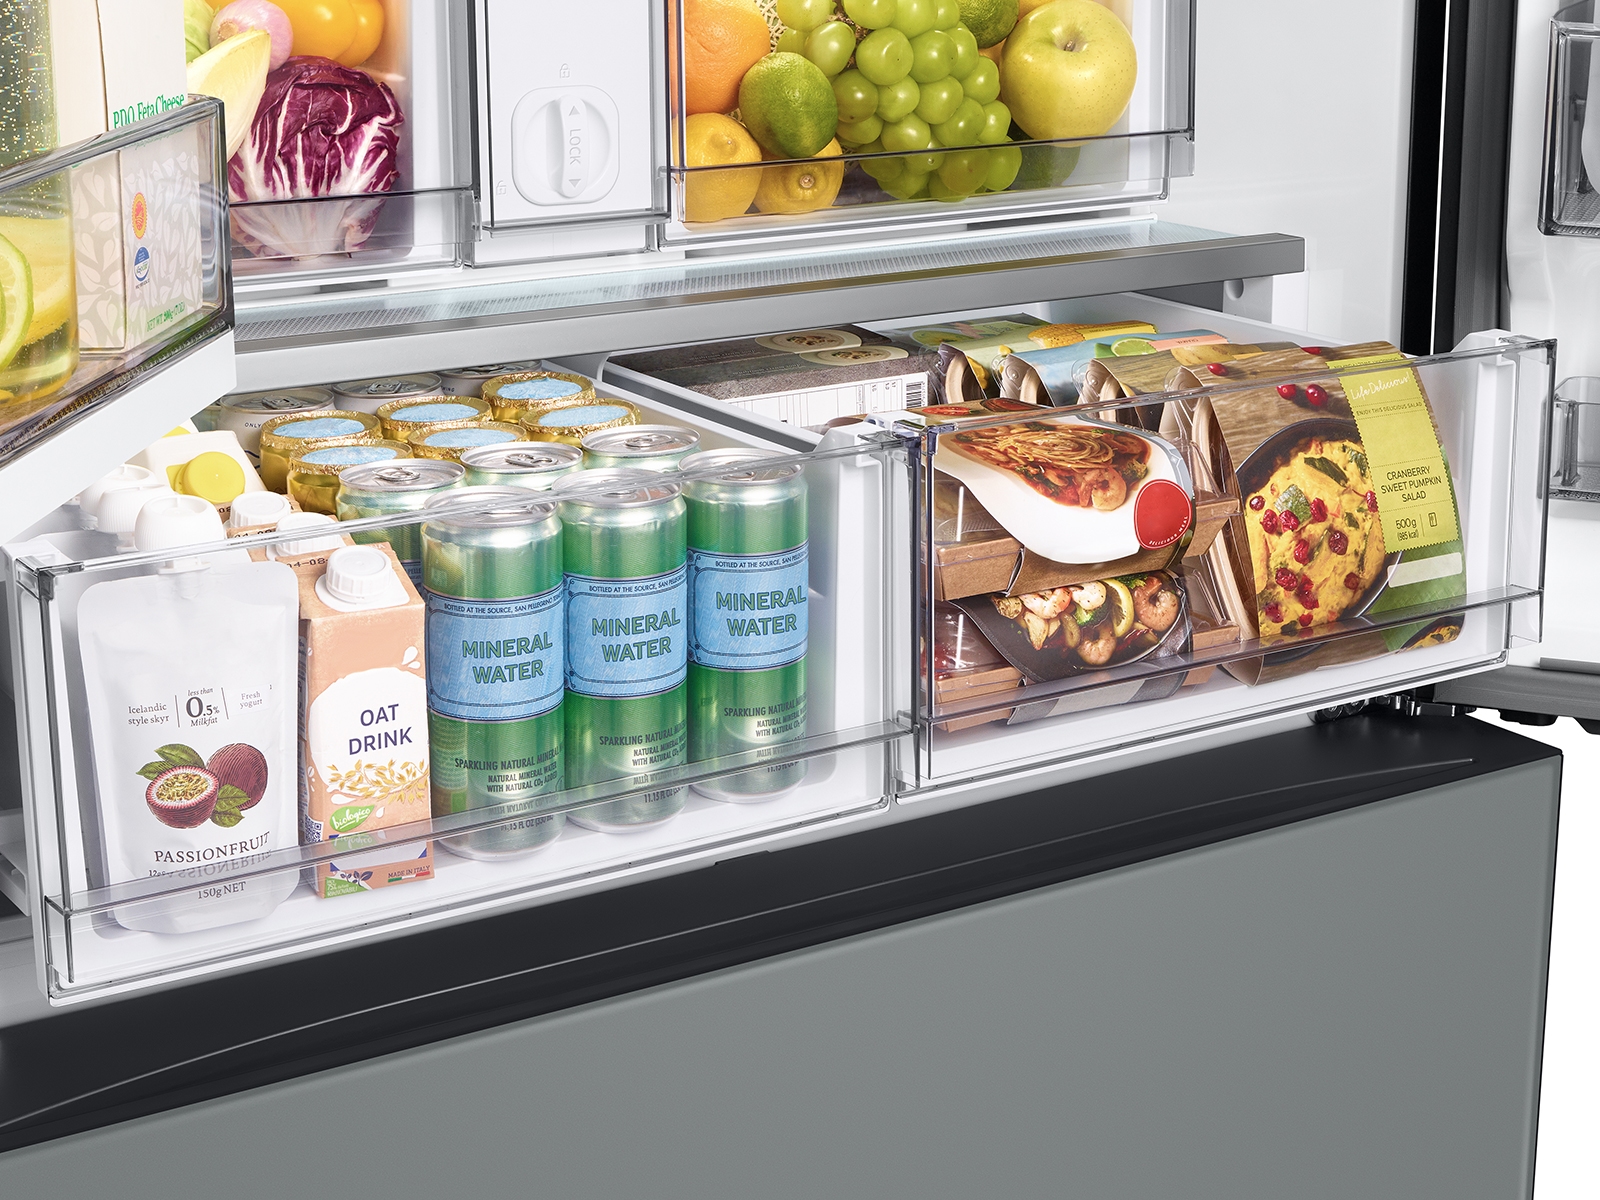 Thumbnail image of Bespoke 3-Door French Door Refrigerator (30 cu. ft.) with Beverage Center&trade; in White Glass